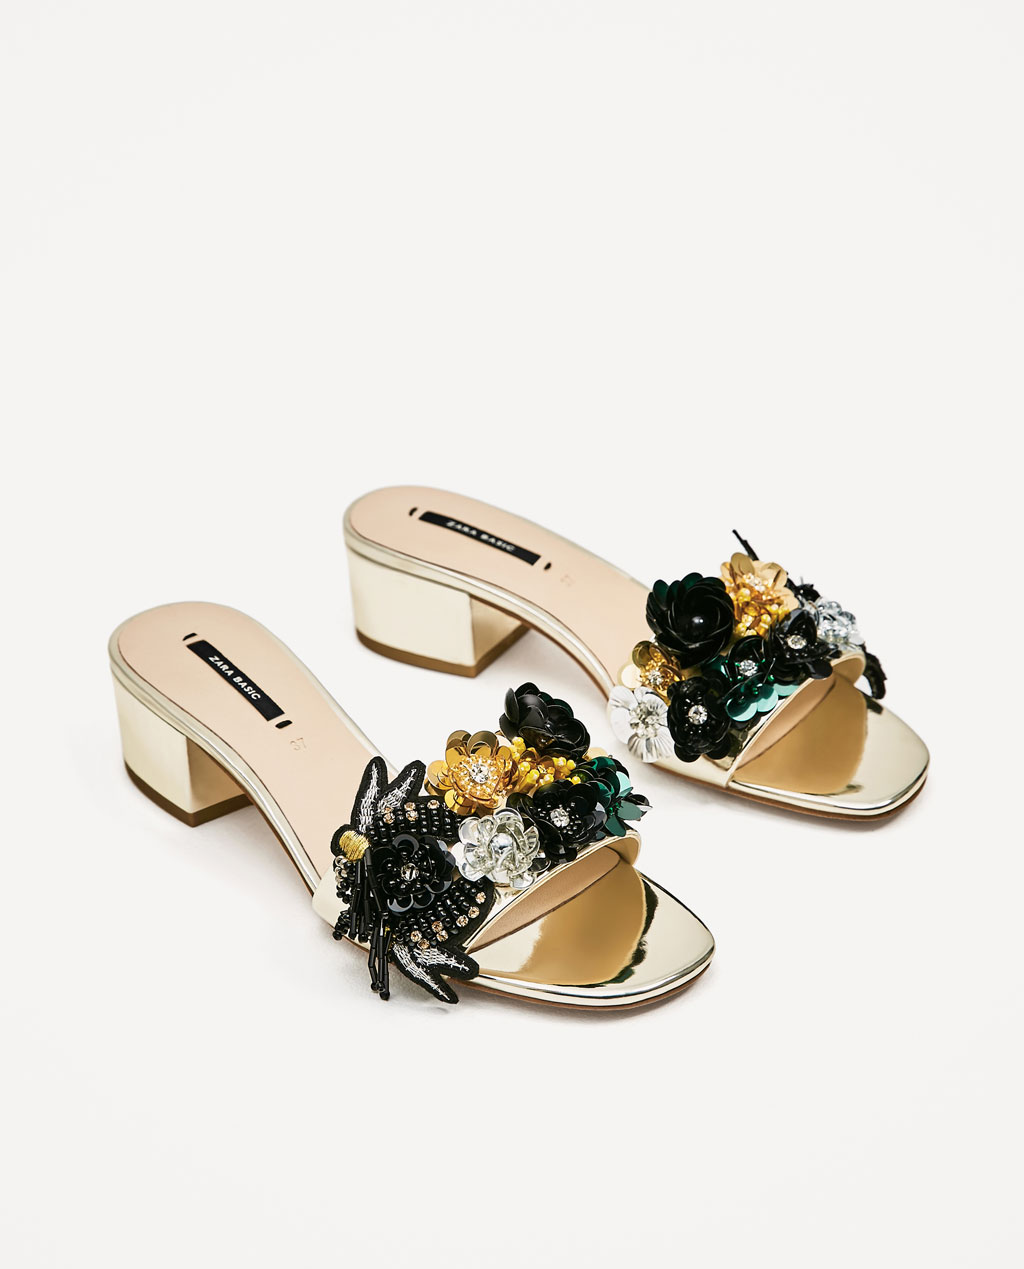 My selection of spring Zara shoes 